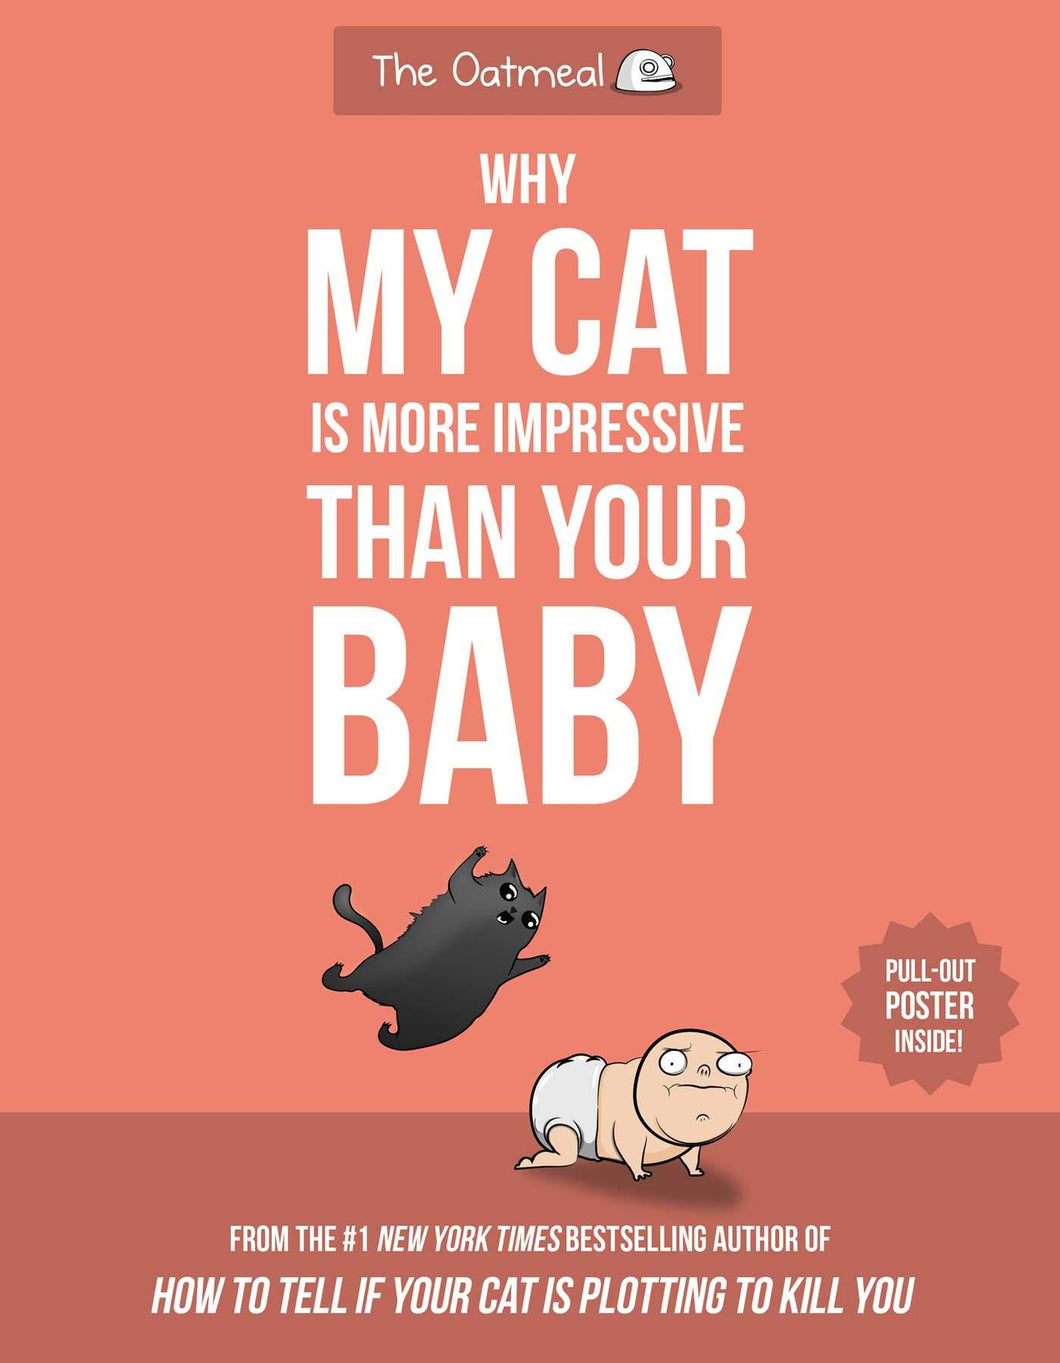 Oatmeal: Why My Cat Is More Impressive Than Your Baby